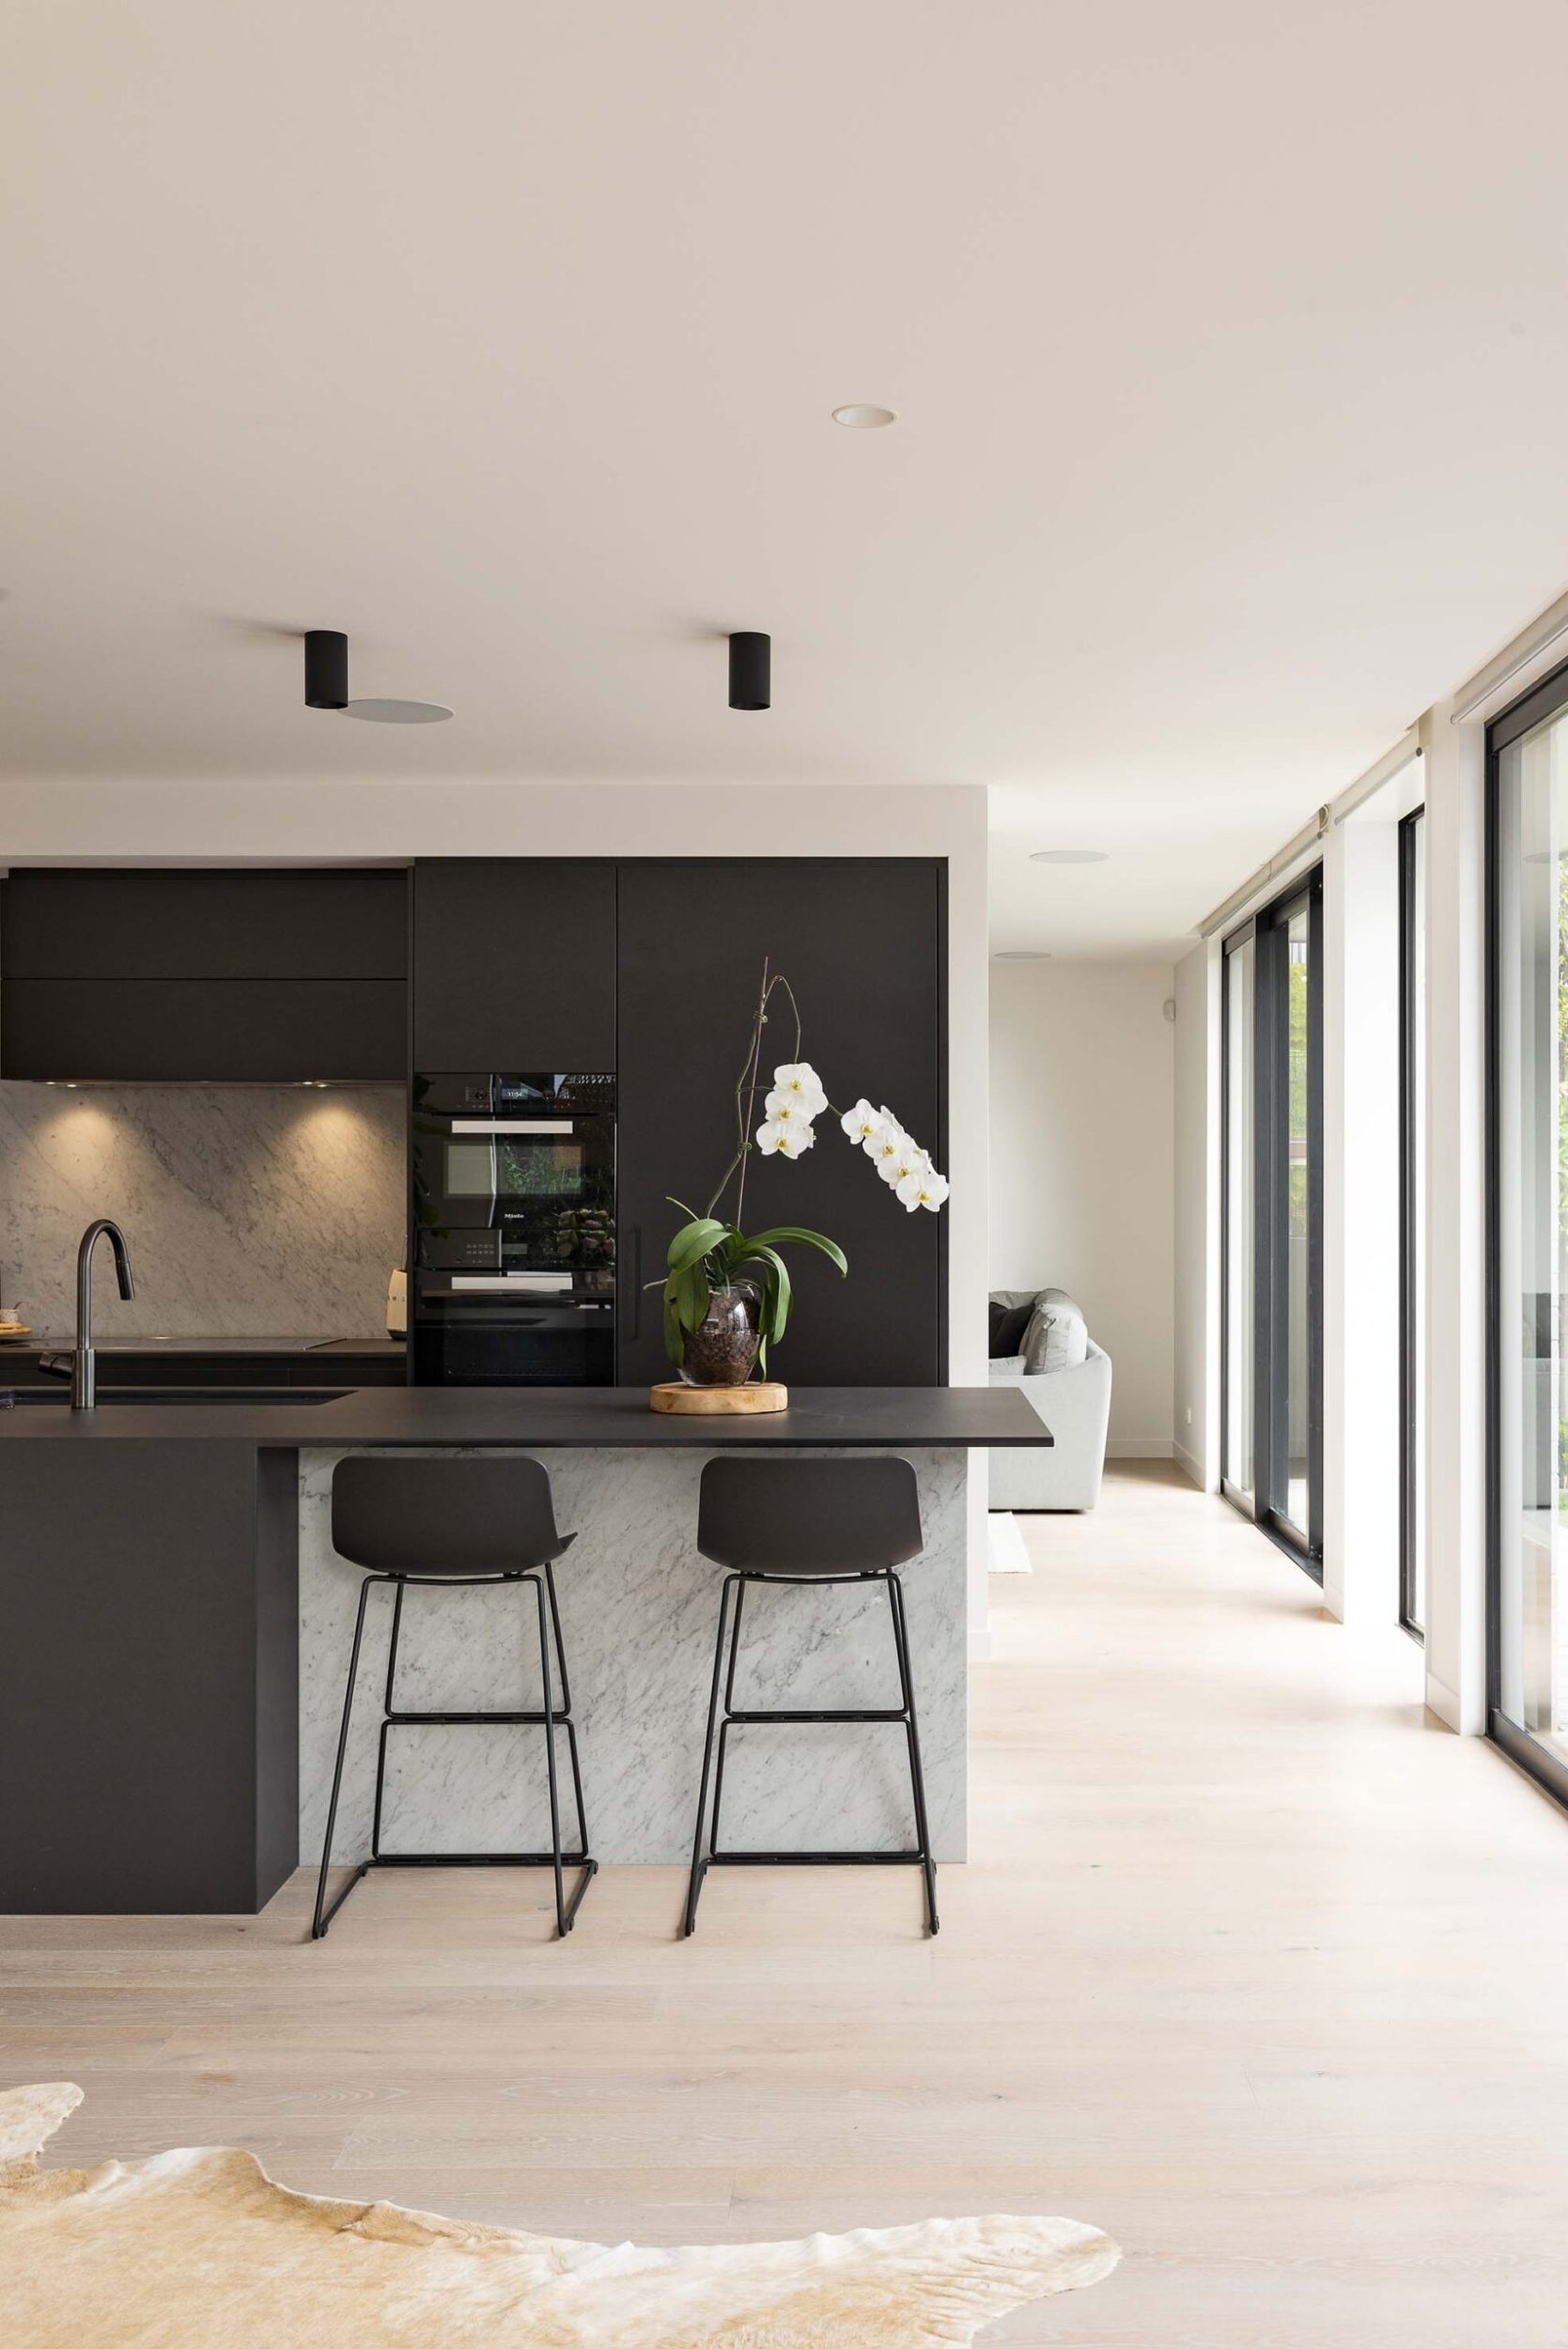 A kitchen with black cabinets, a stone splashback and black metal stools